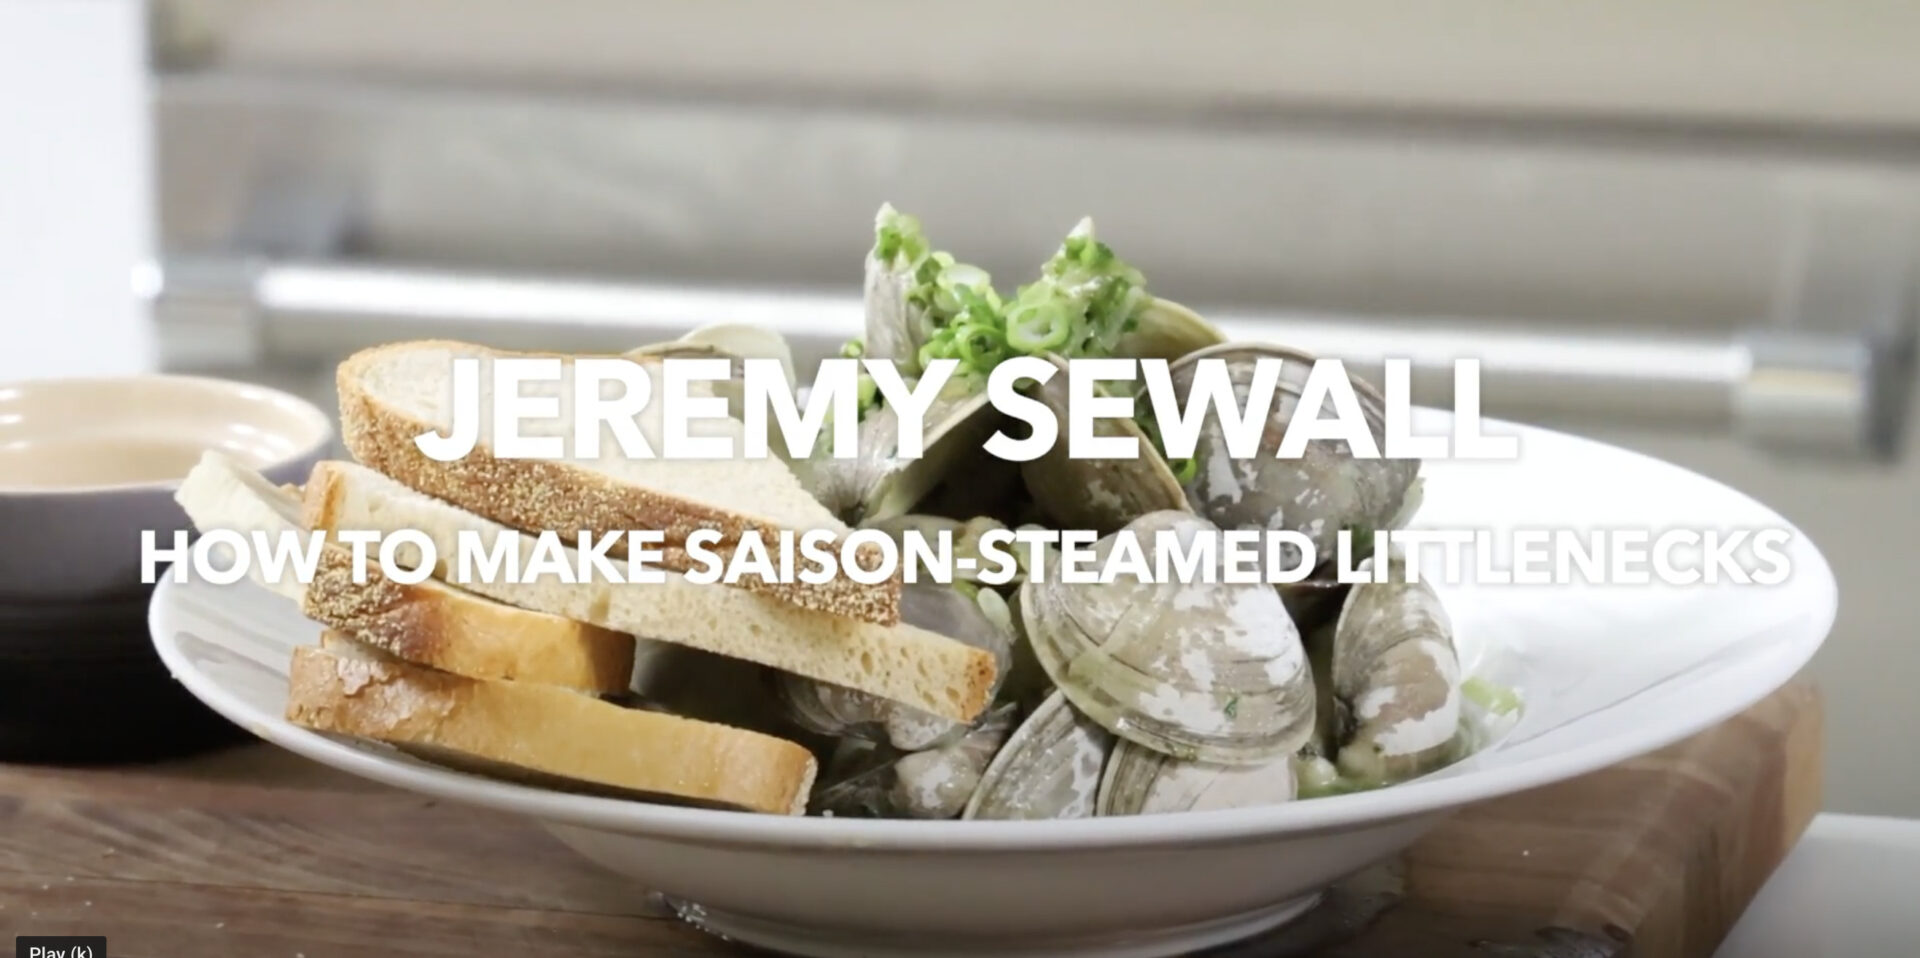 Steamed clams prepared by Jeremy Sewall